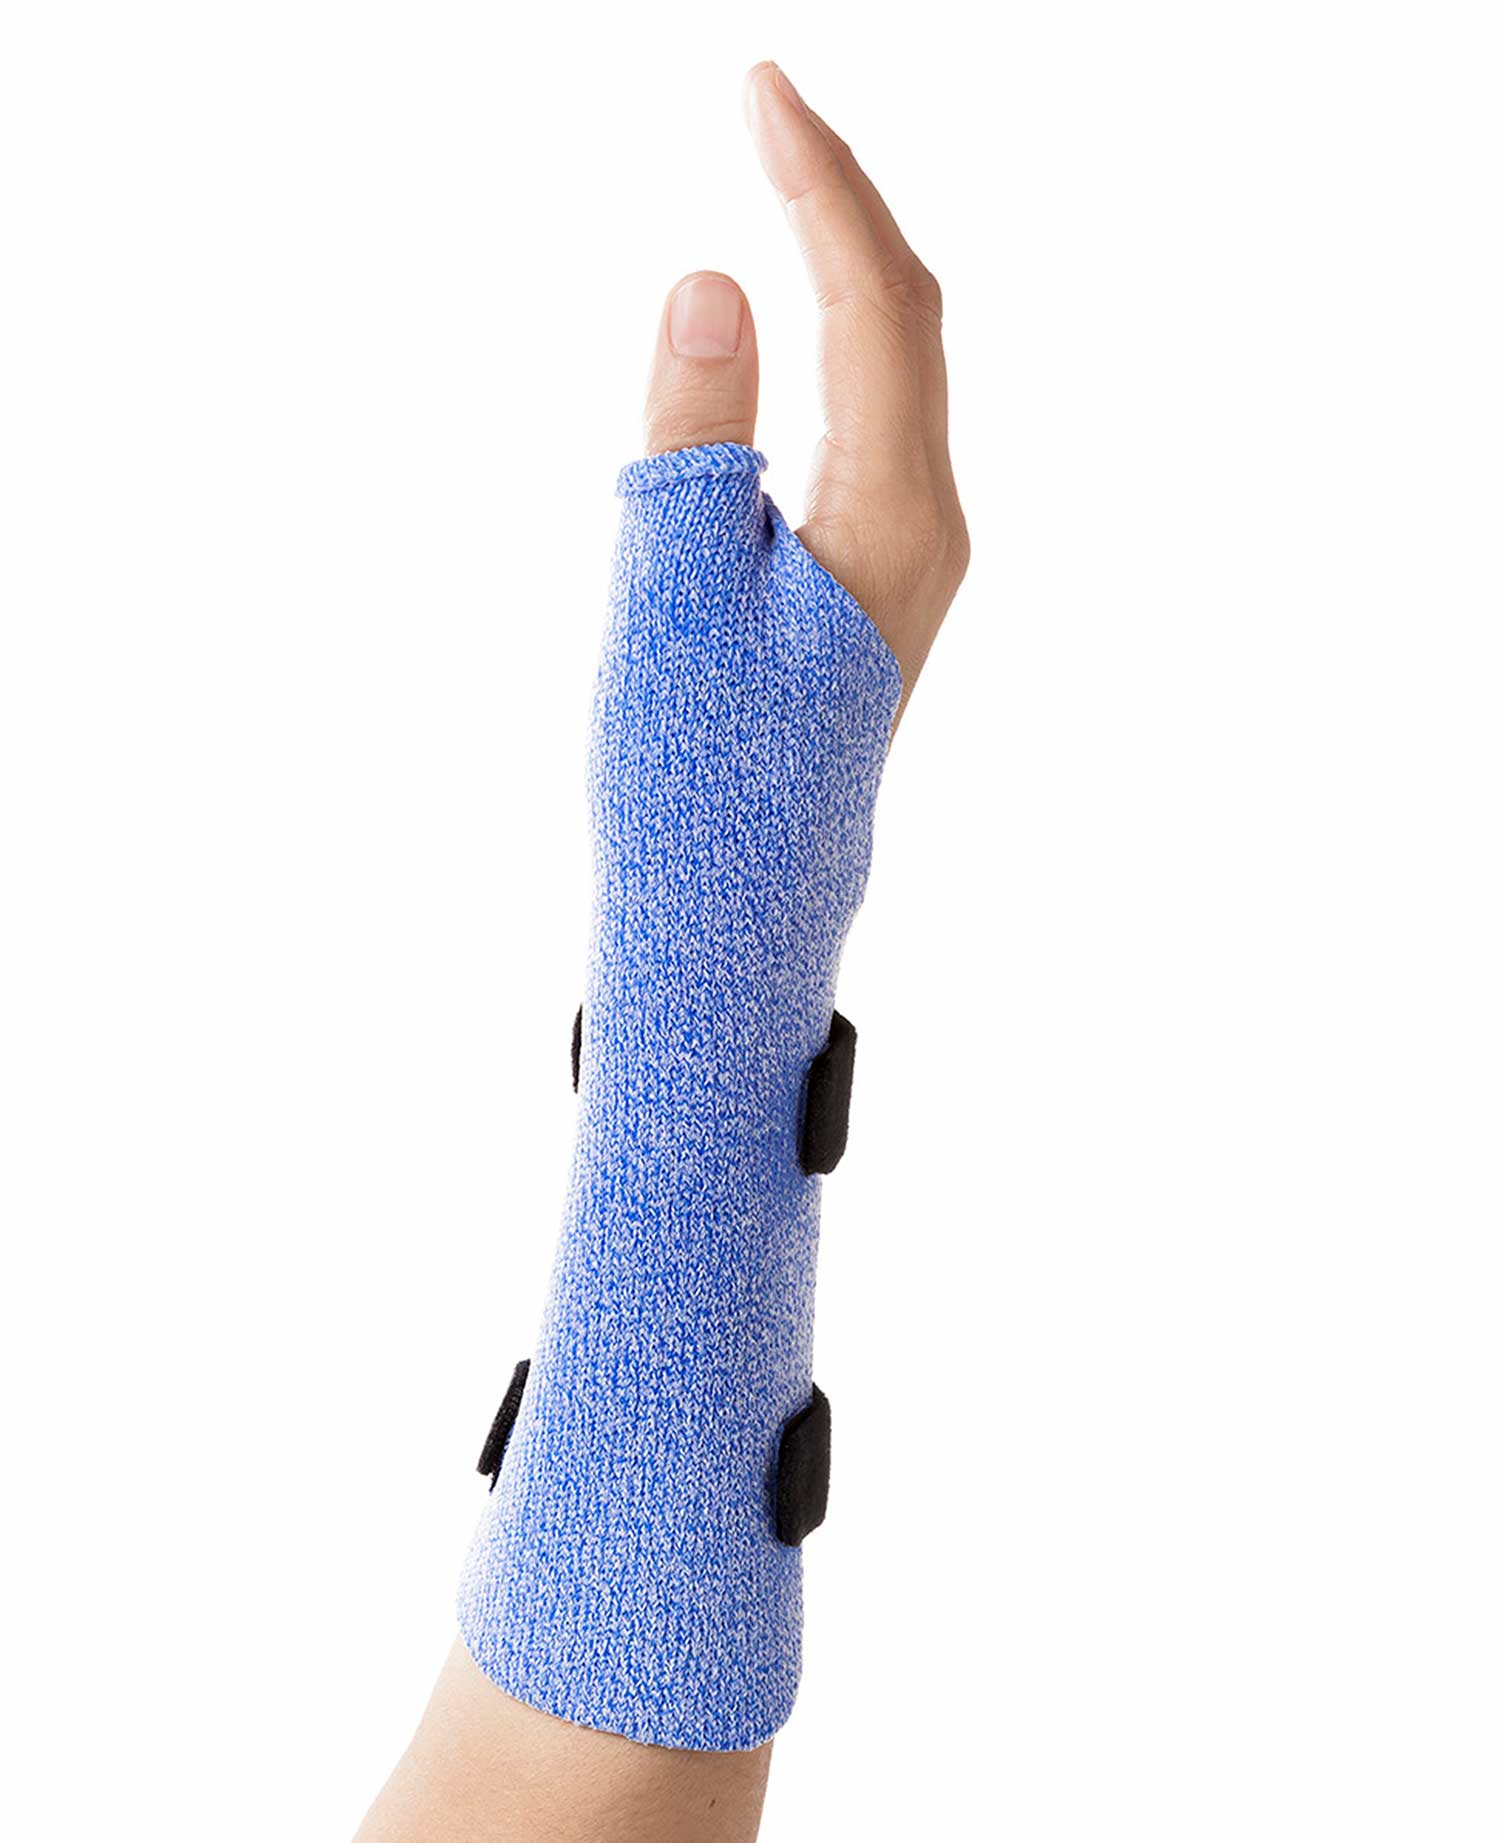 Long opponens orthosis in Orficast